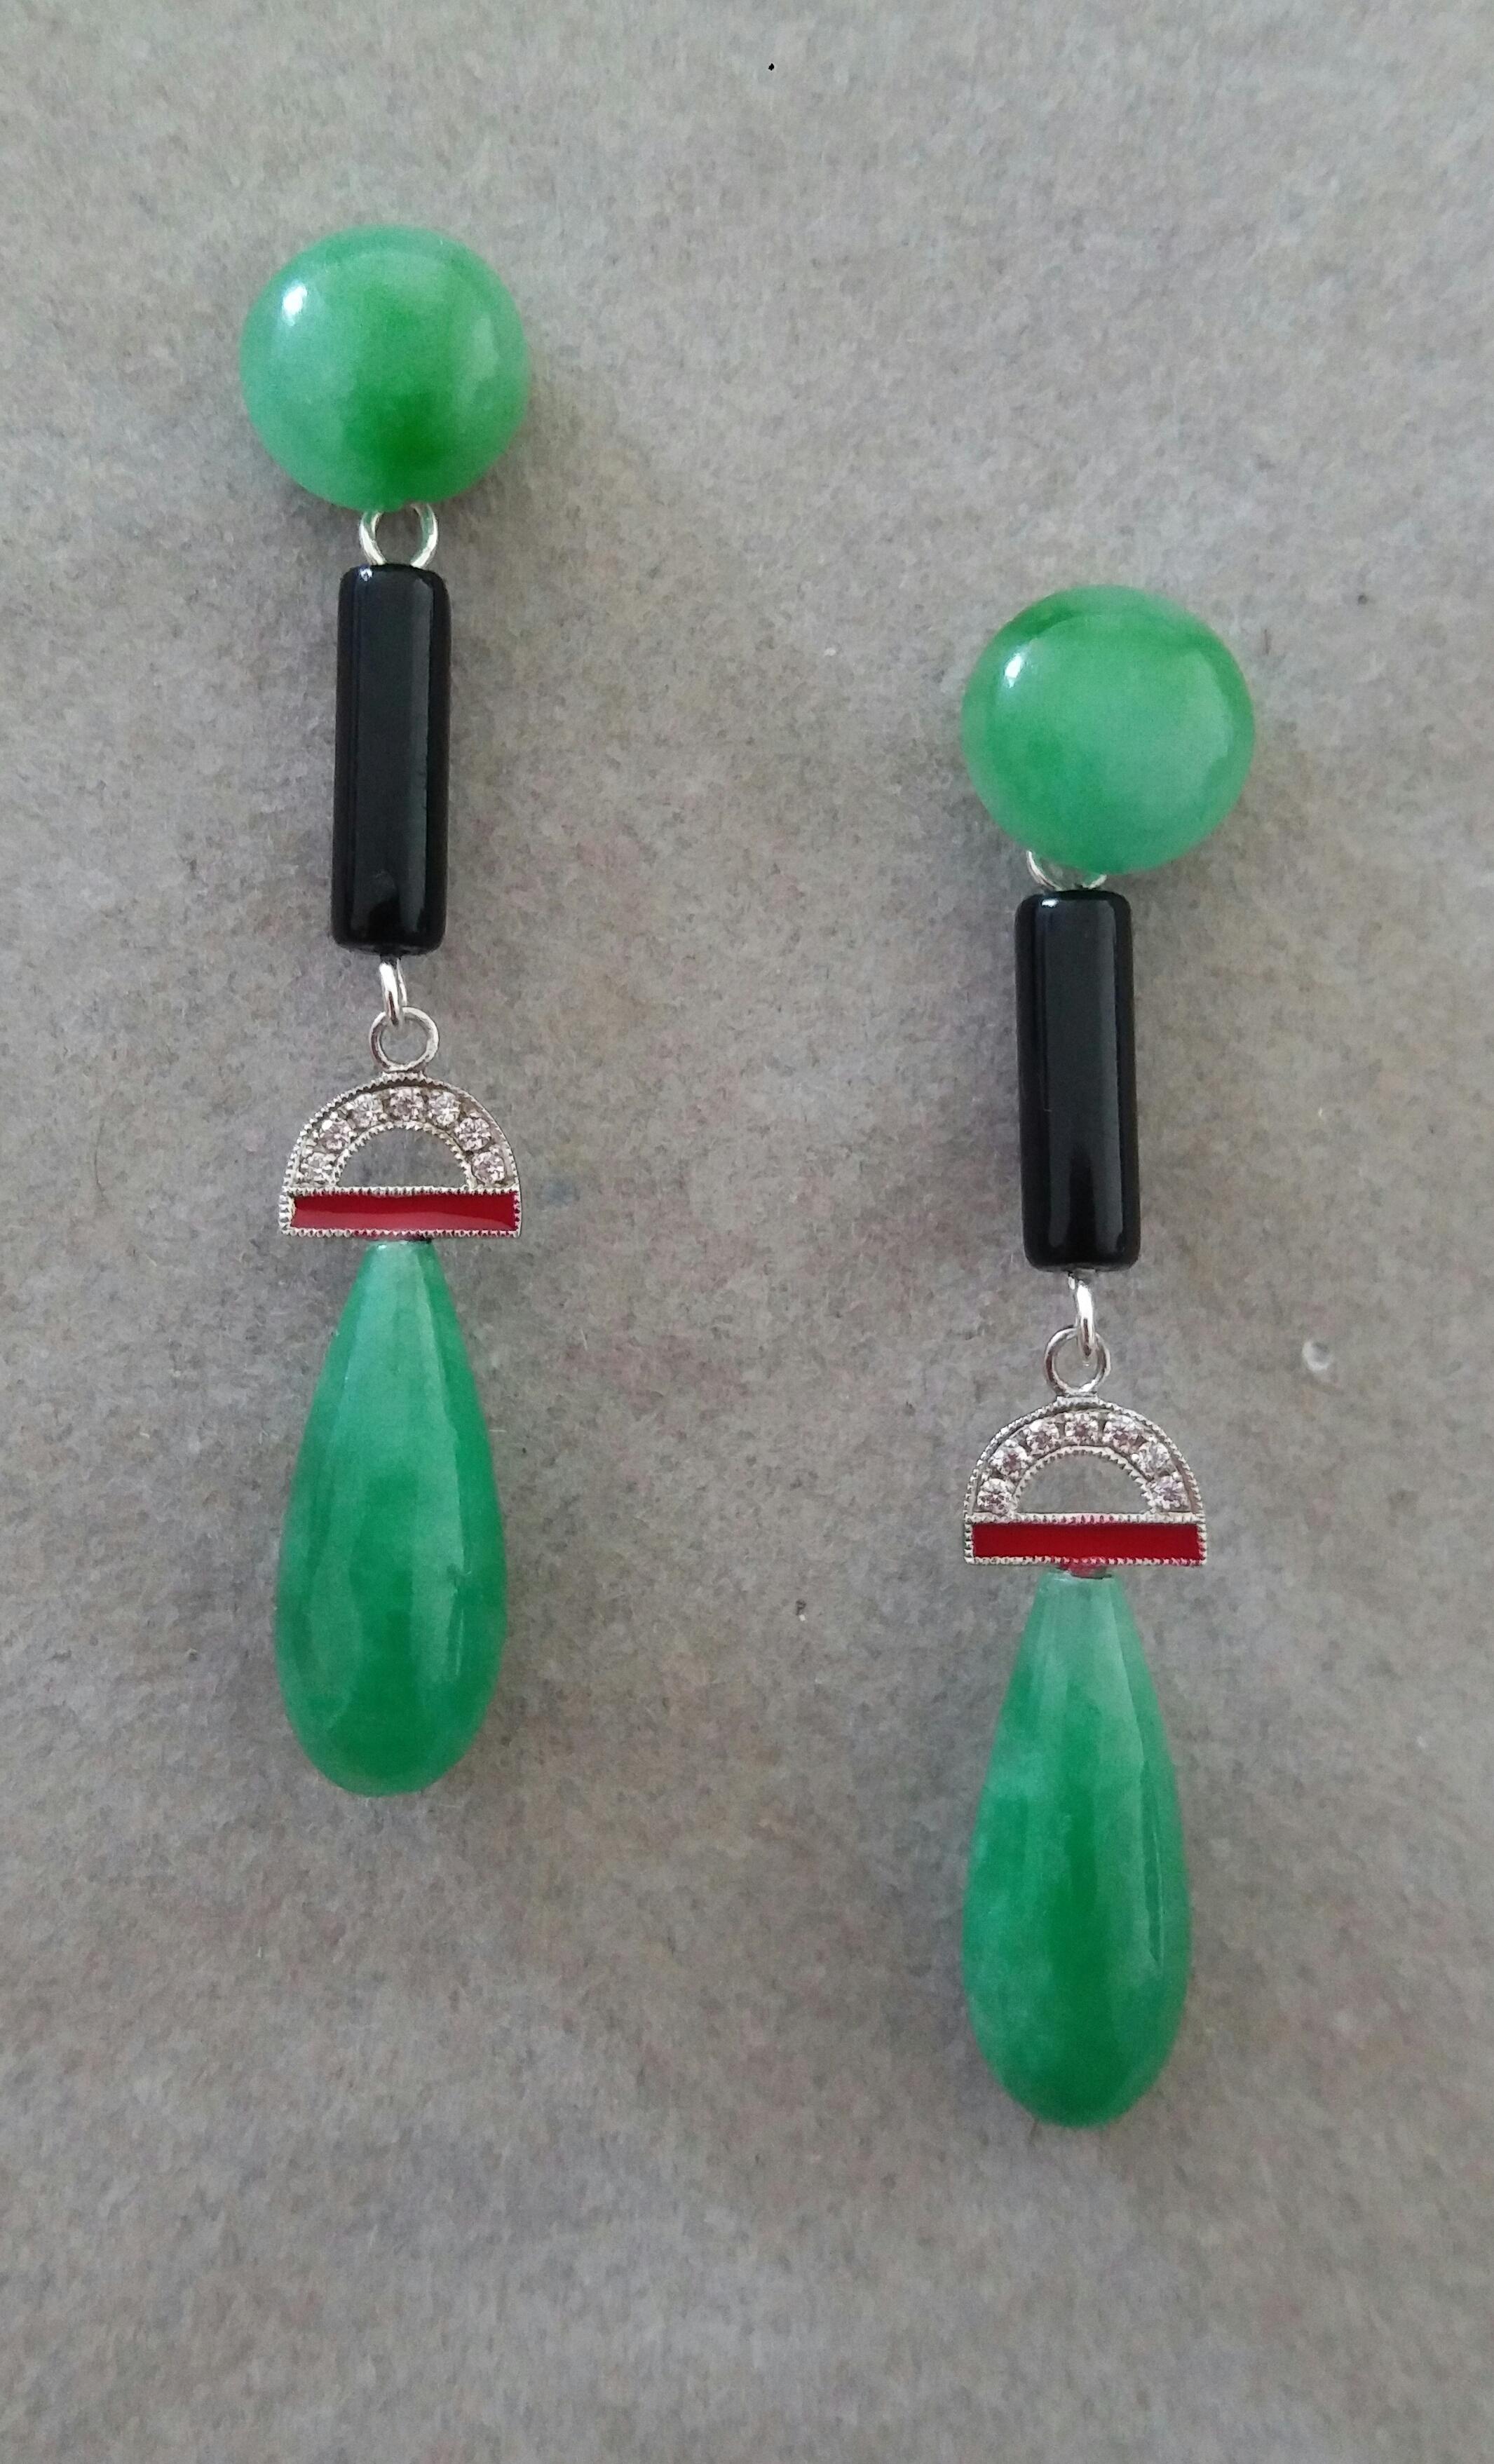 In these light weight ( 7 grams) classic Art Deco Earrings we have 2 round jade buttons of 10 mm in diameter on top , the central part is in gold , 14 full cut round diamonds, red enamel and 2 small black onyx cylinders , the bottom part is composed